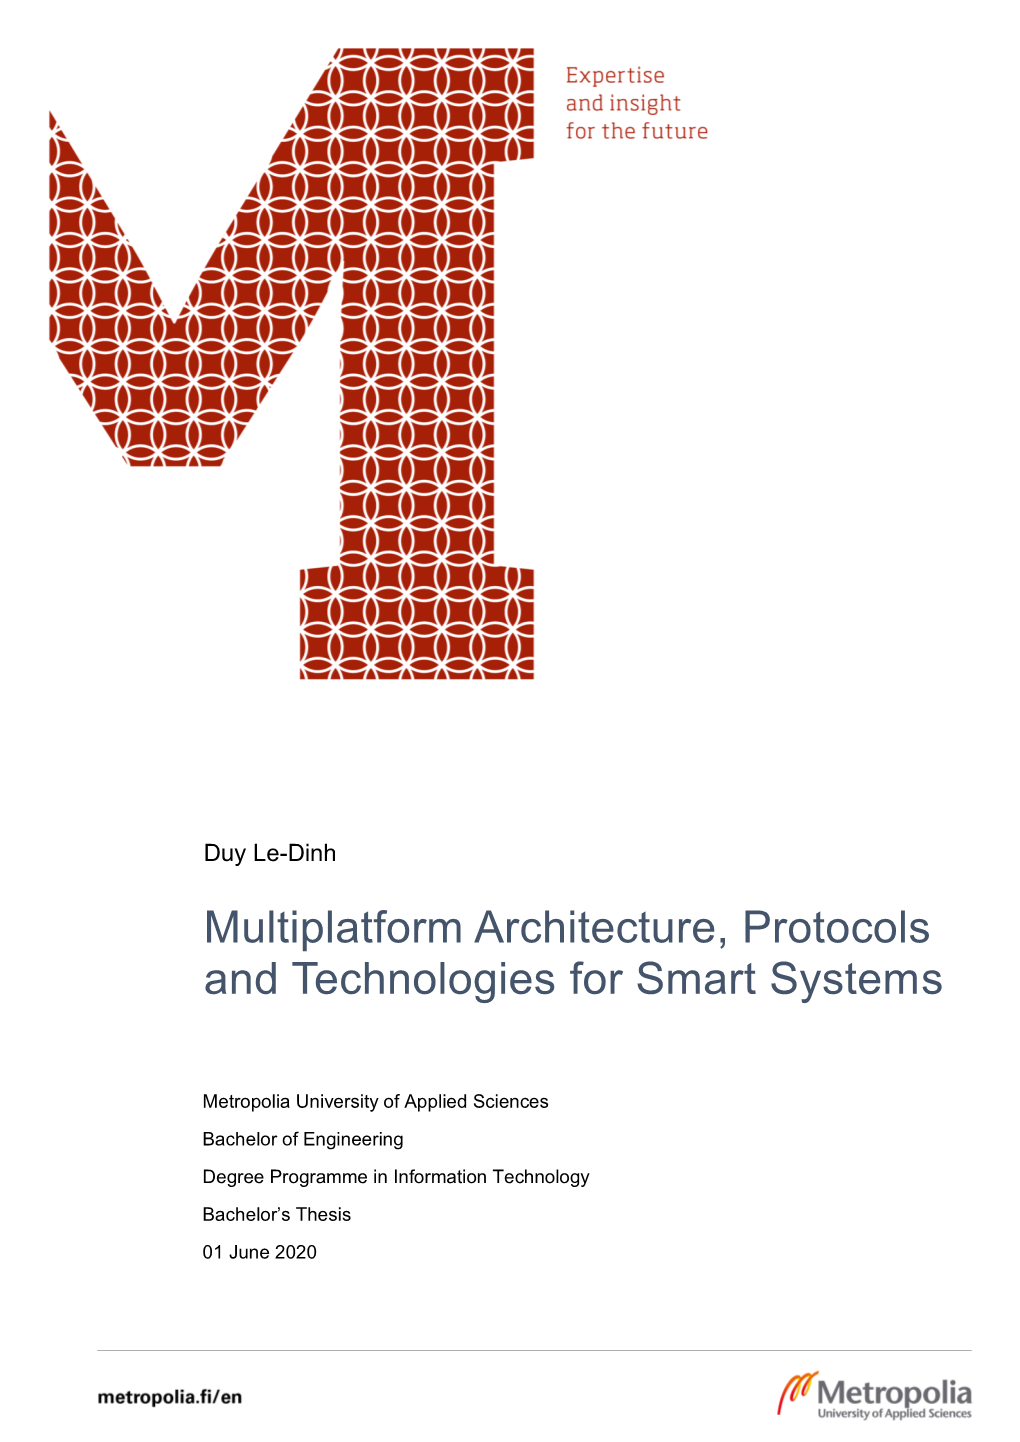 Multiplatform Architecture, Protocols and Technologies for Smart Systems